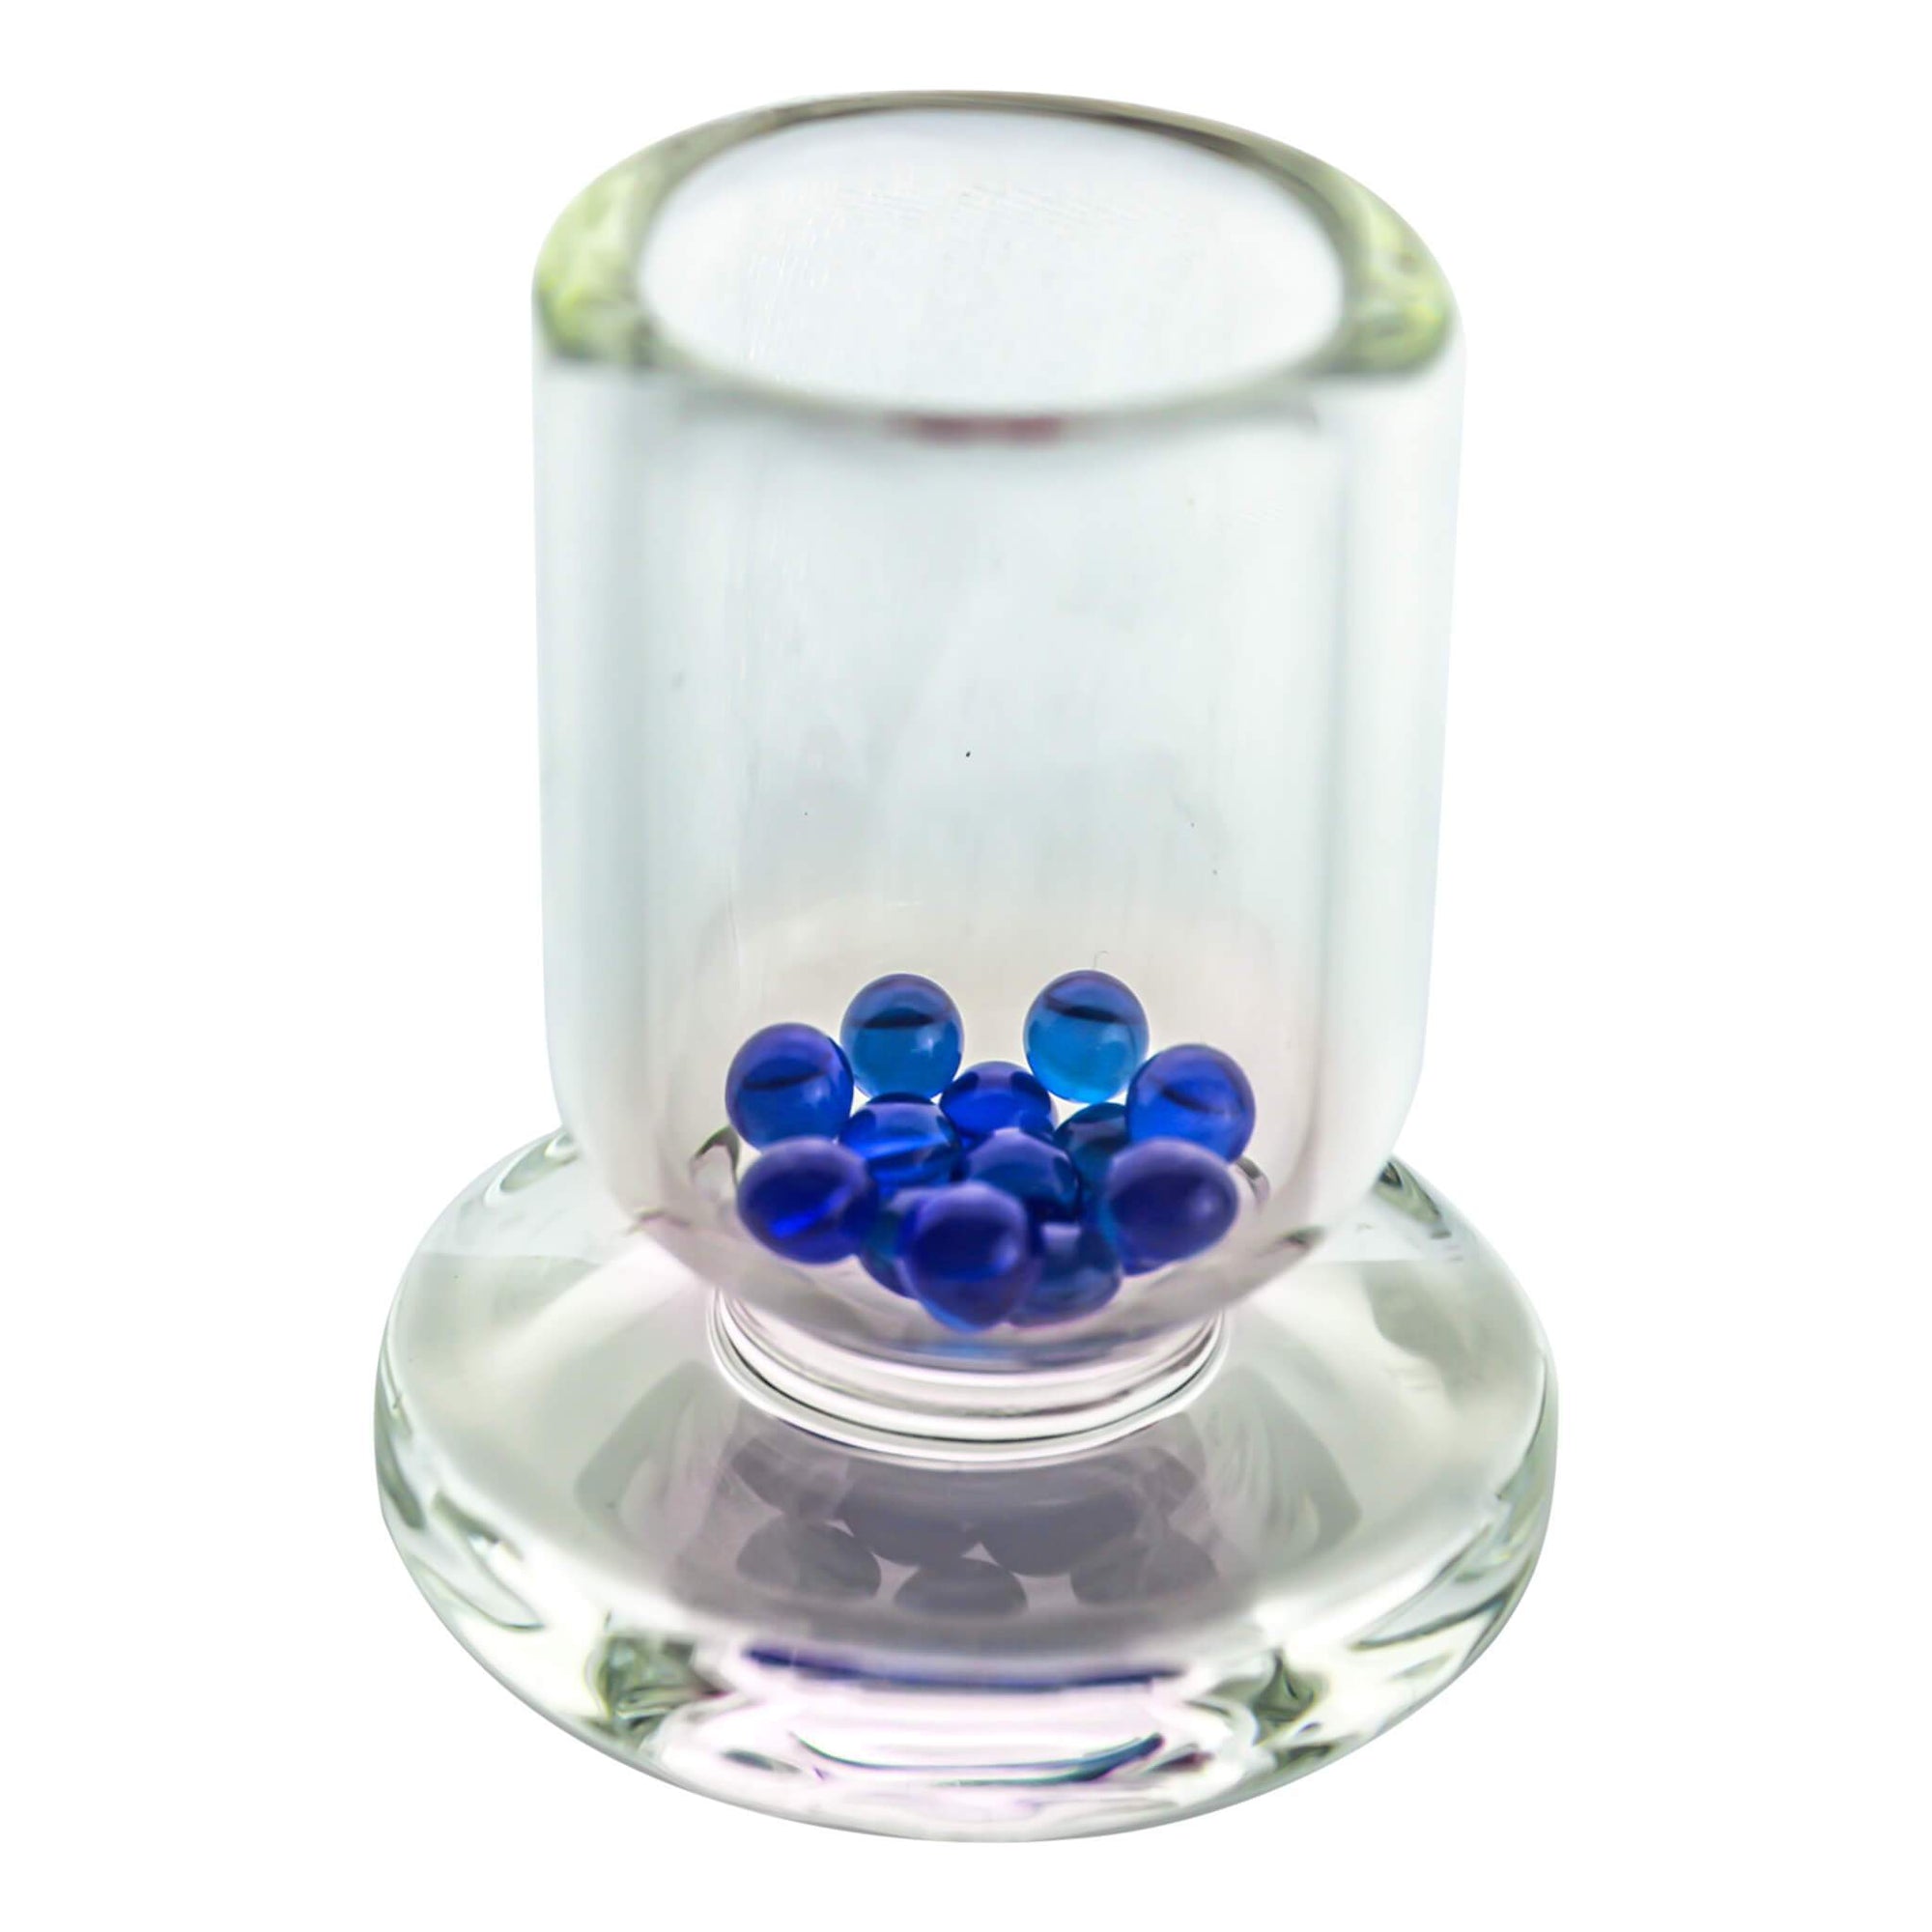 4mm Terp (Dab) Pearls-Blue Crystal | Blue Crystal Terp Pearls In Banger View | DW